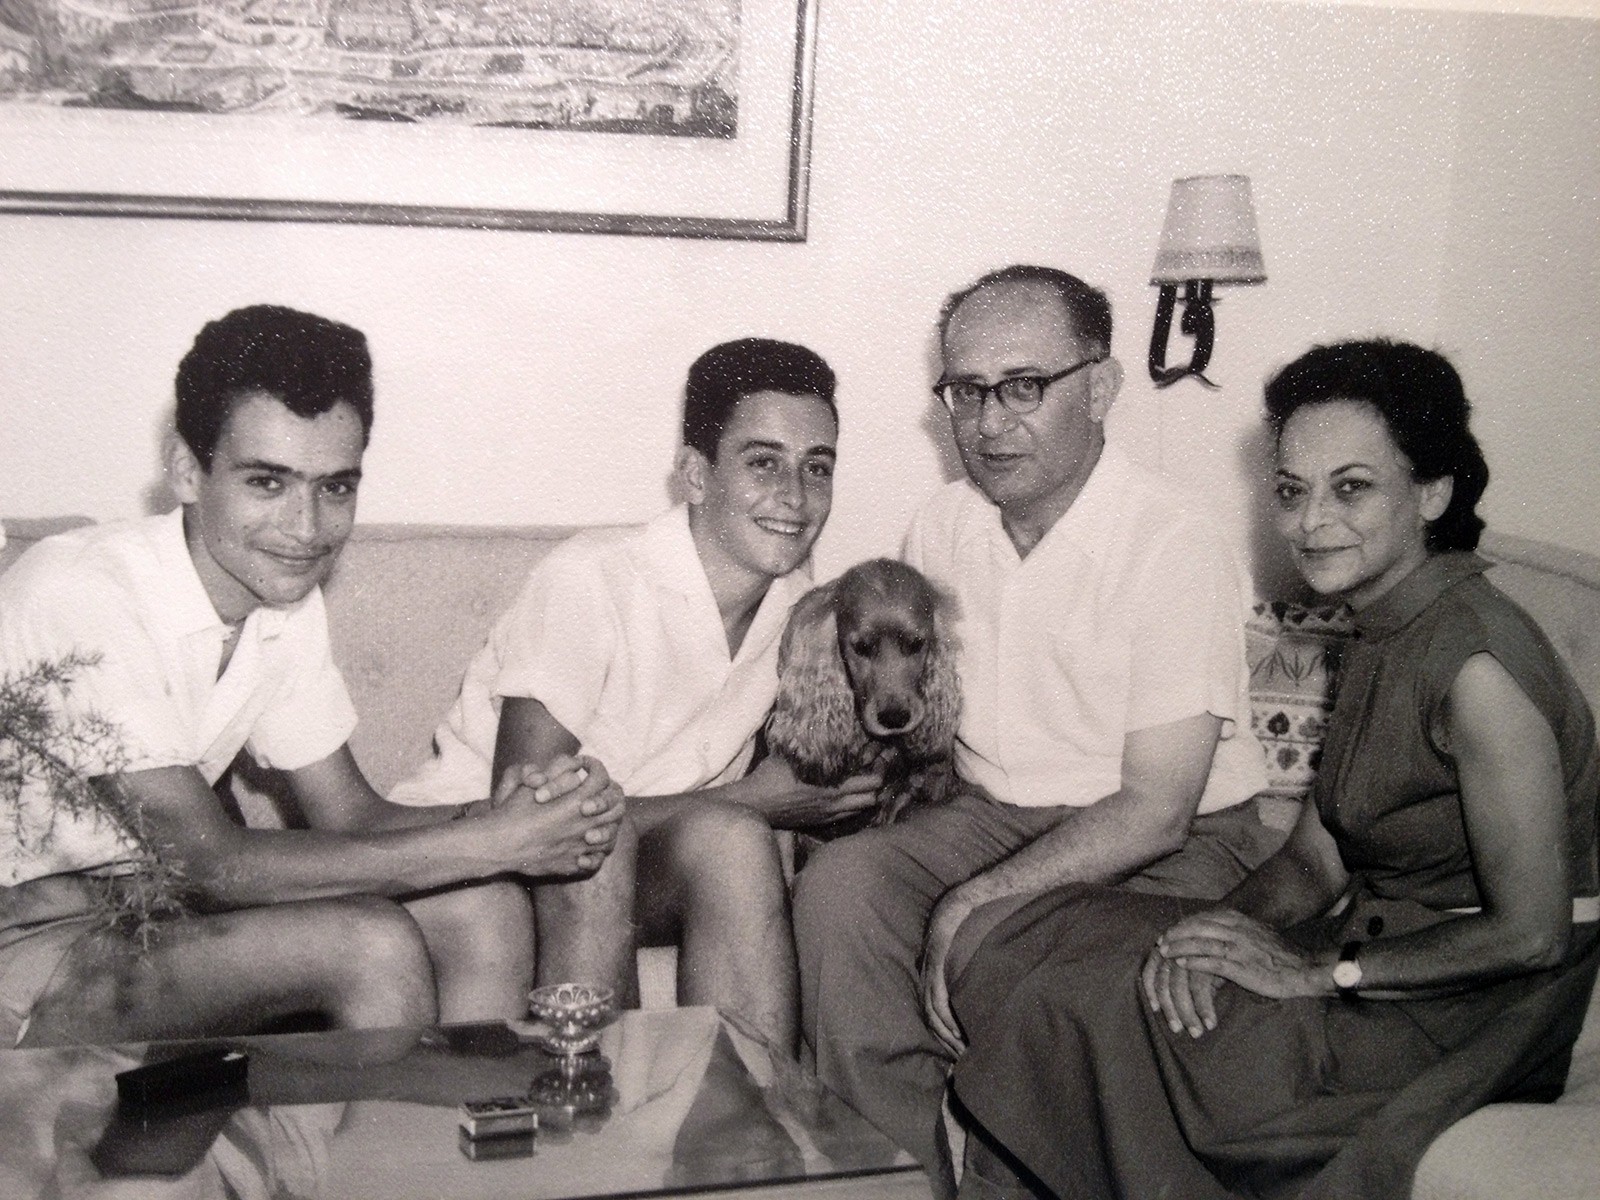 The Yahil family around 1960: Amos, Jonathan, Chaim, and Leni © Private collection.